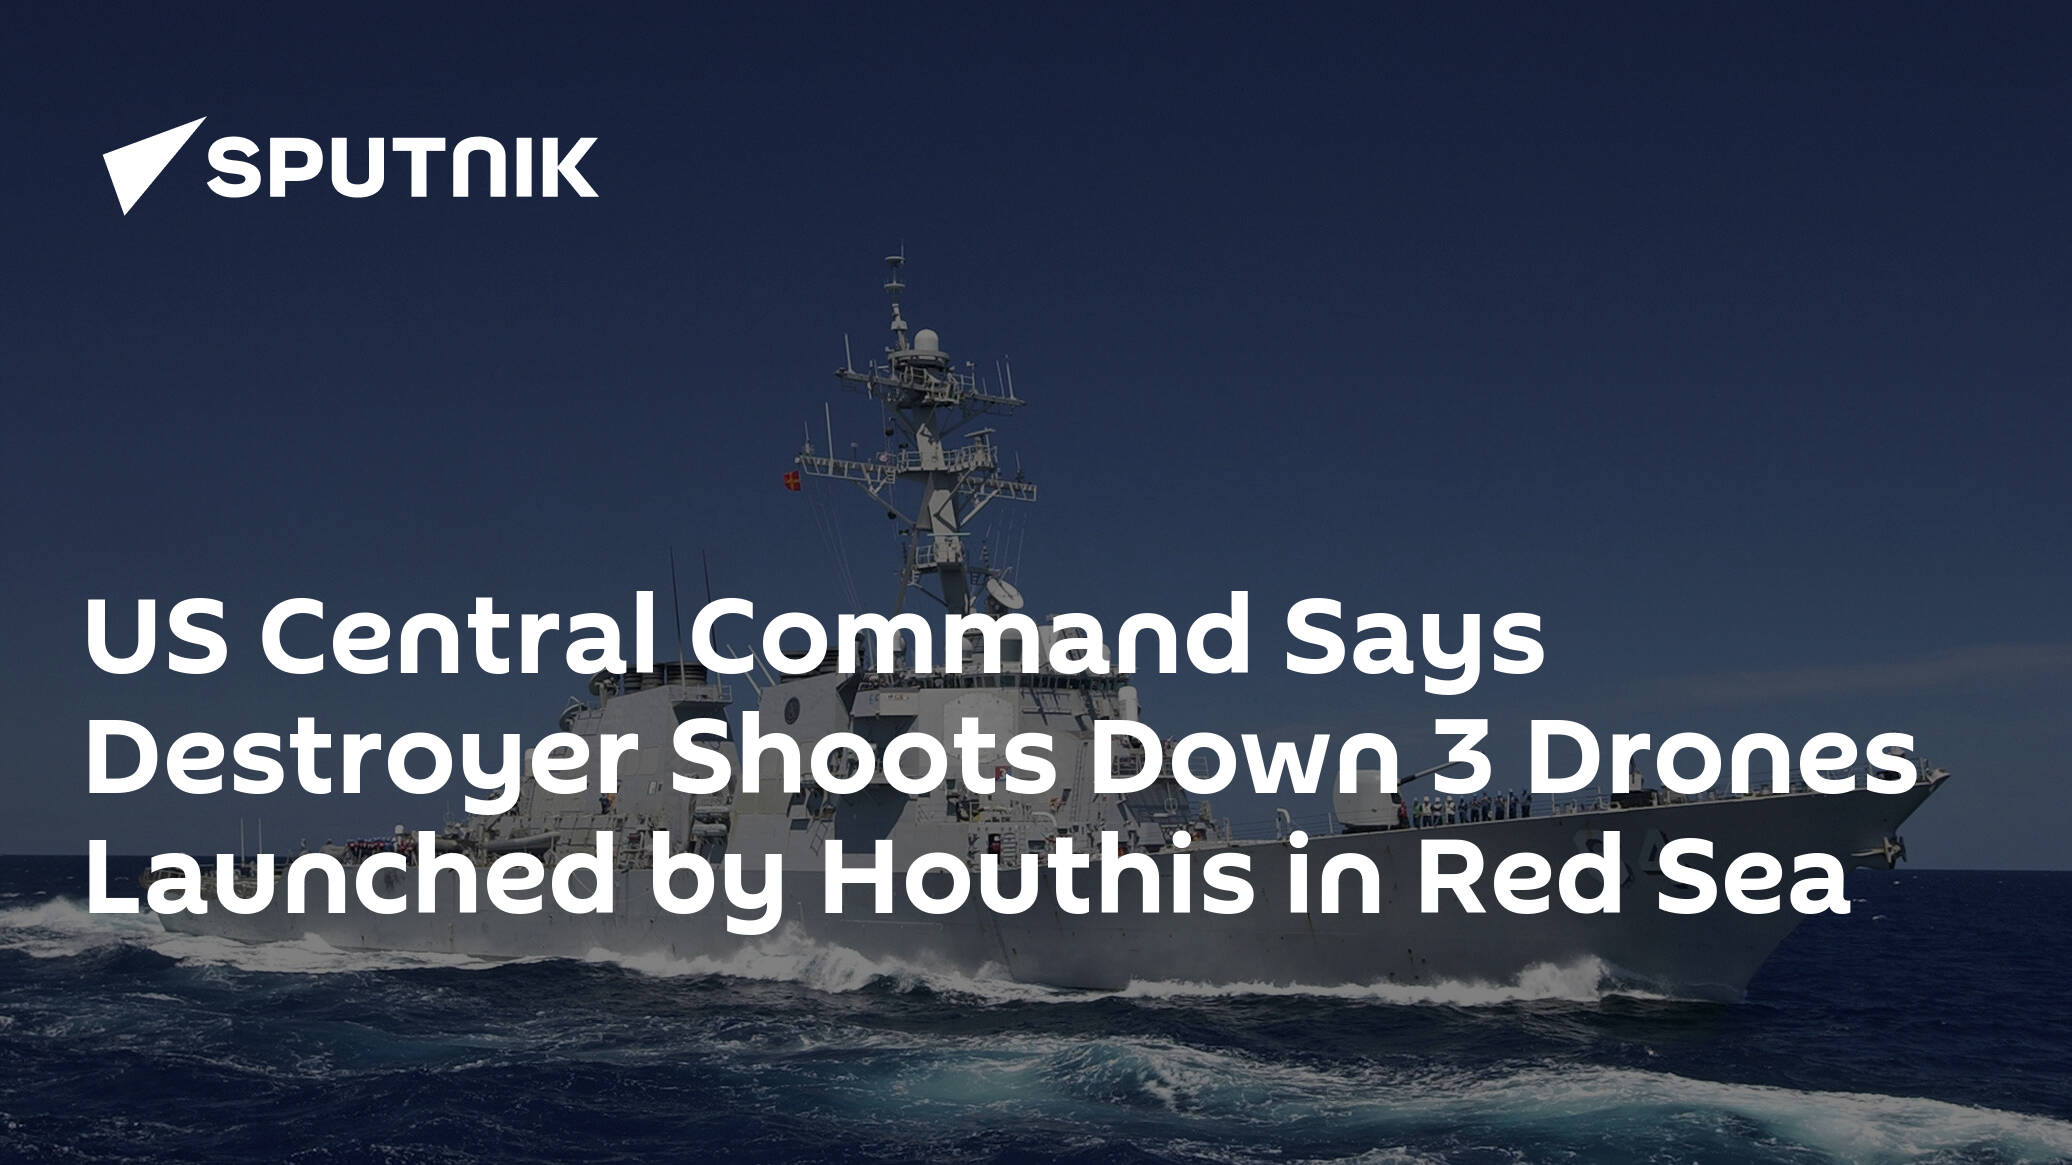 US Central Command Says Destroyer Shoots Down 3 Drones Launched by Houthis in Red Sea